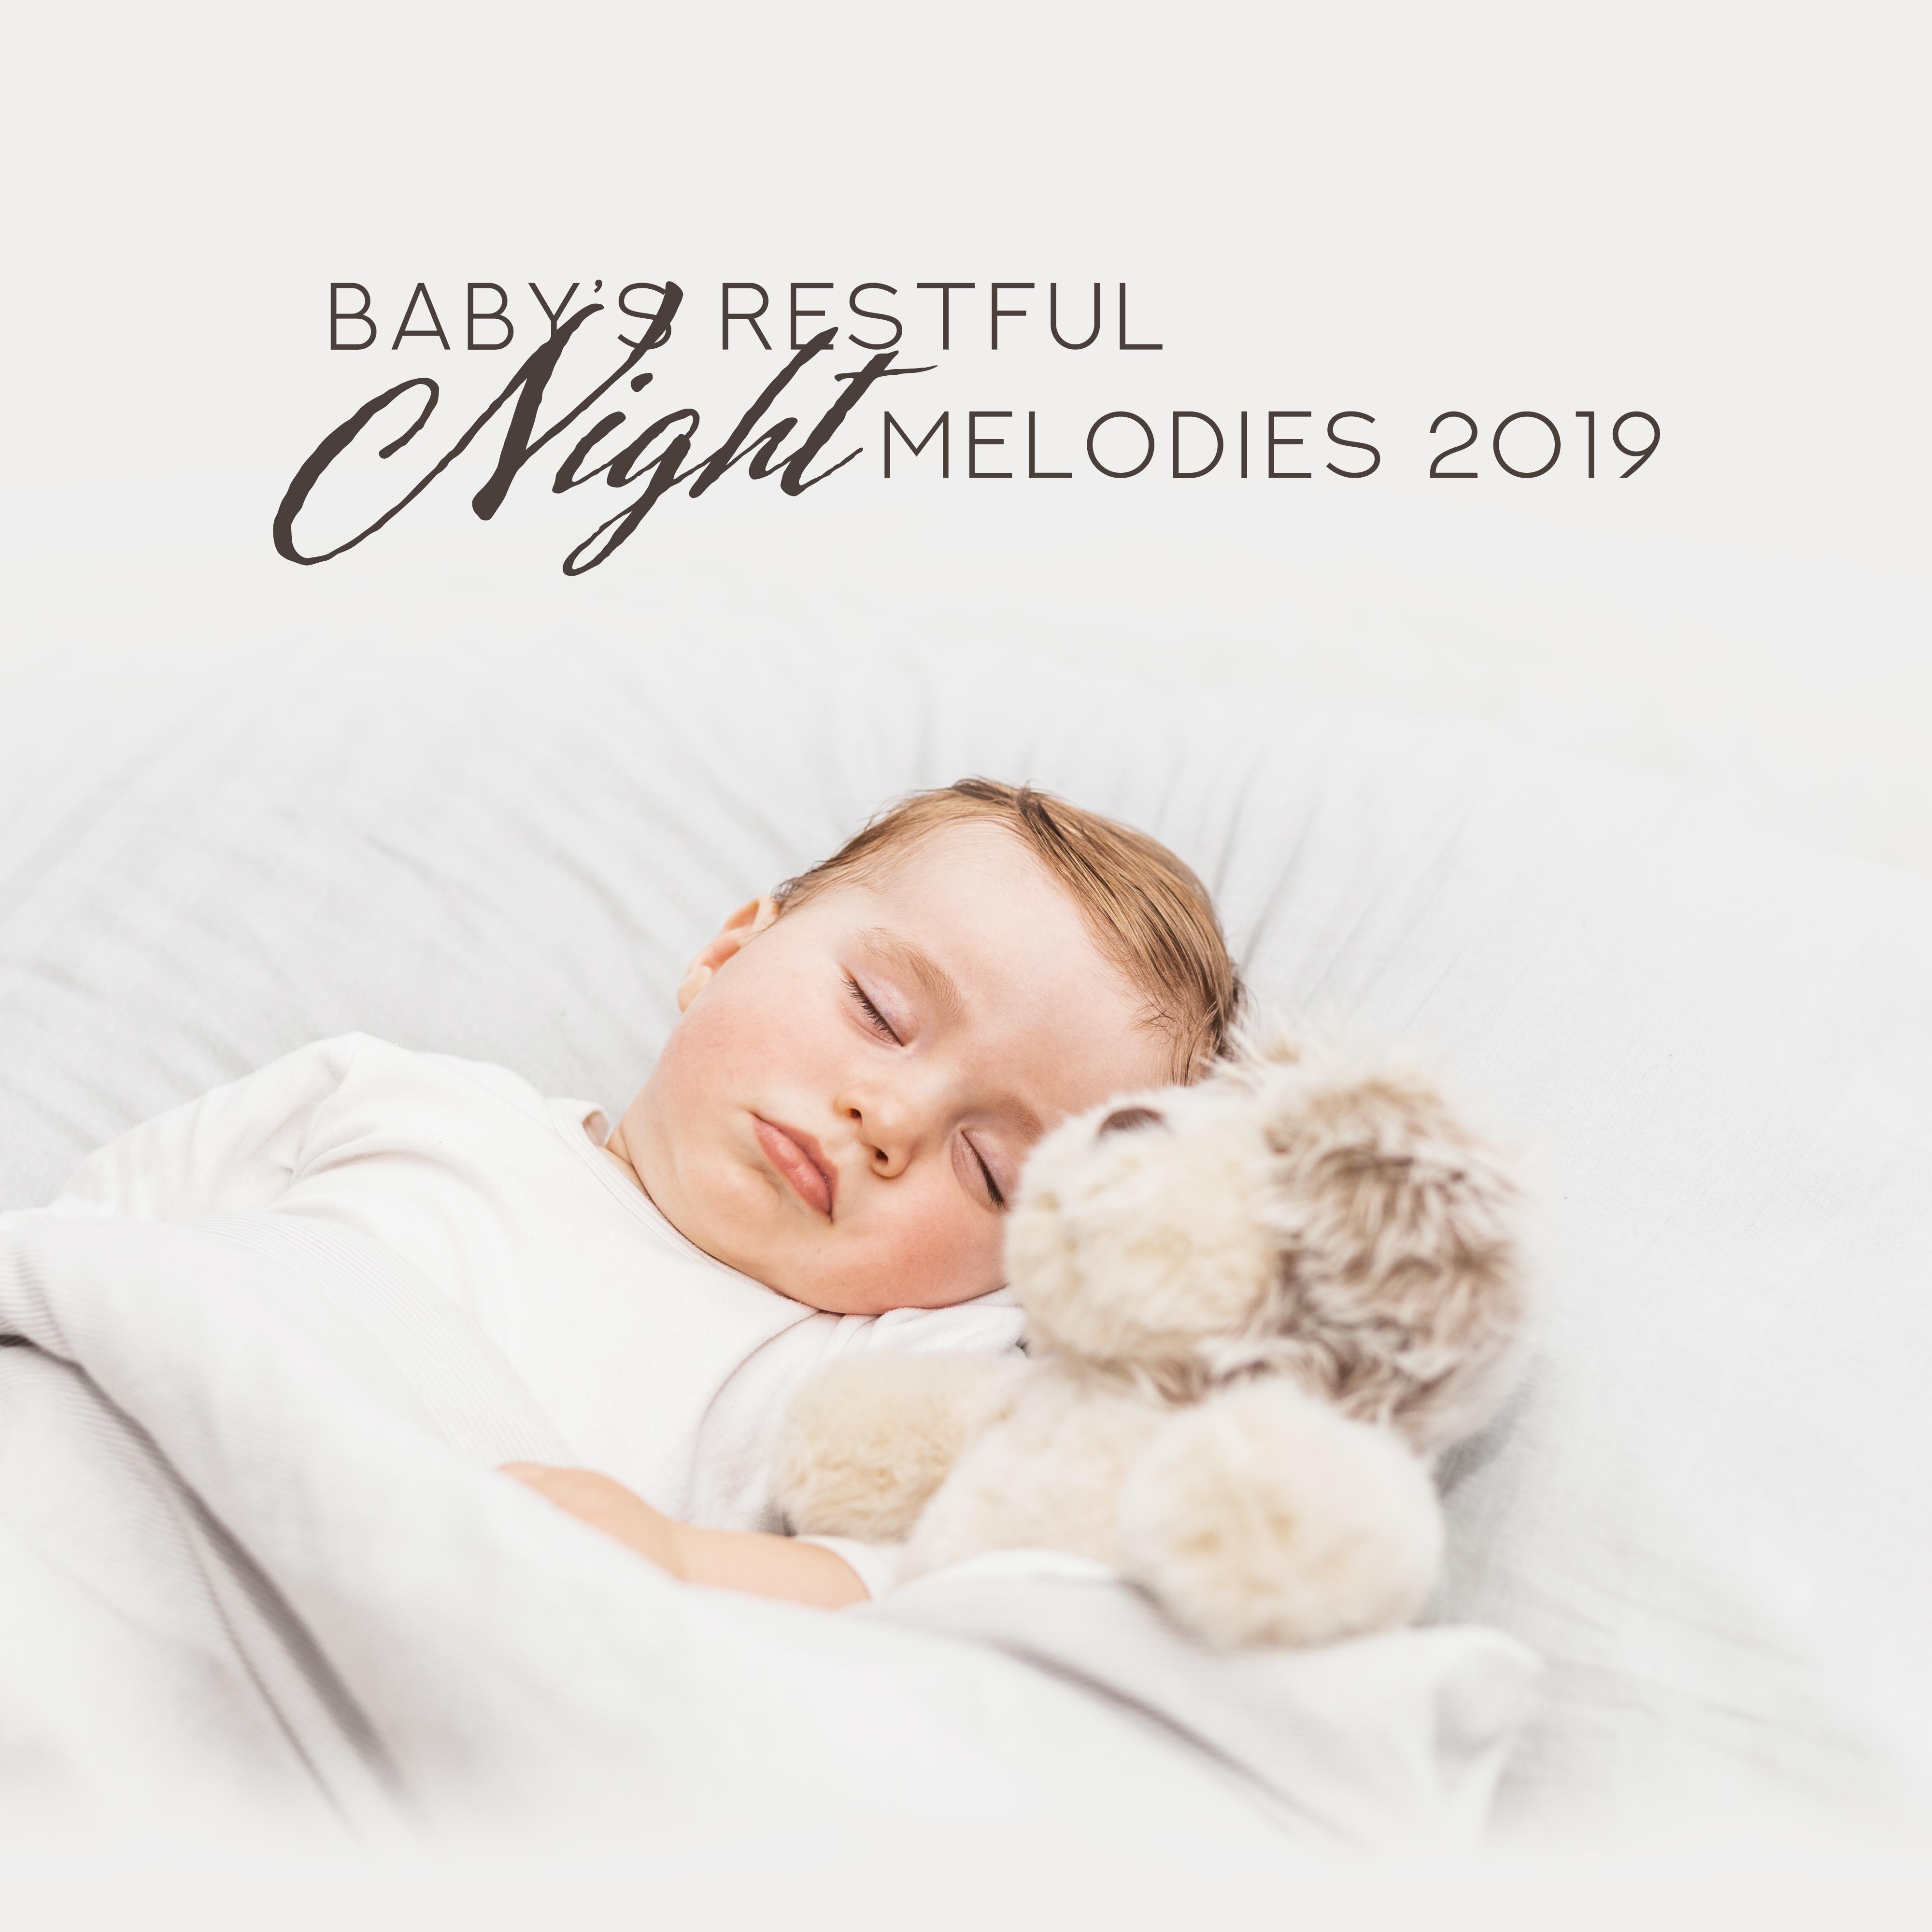 Baby' s Restful Night Melodies 2019: New Age Soothing Music Compilation for Little Baby, Cure Insomnia, Calm Down, Sleep All Night Long